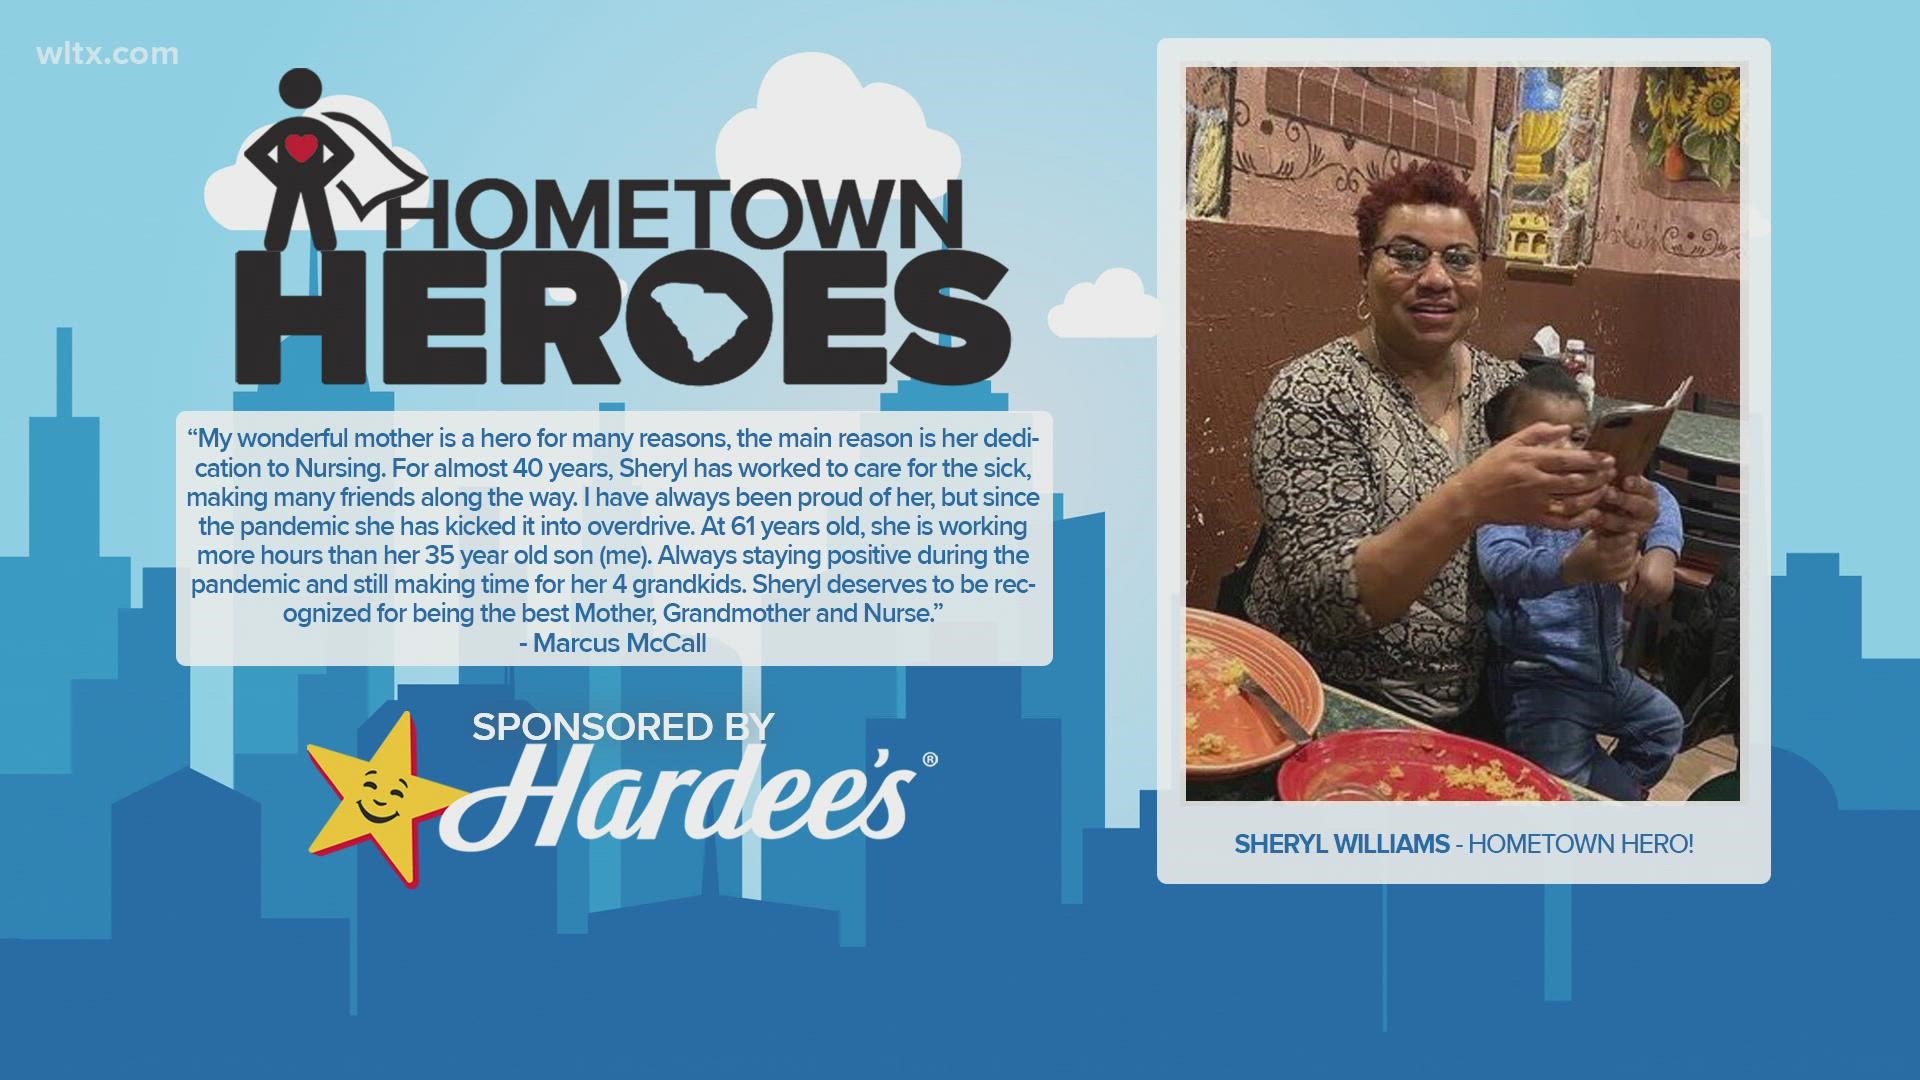 Sheryl Williamswas nominated by her son Marcus. 	Her son says she is a hero for many reasons, but mainly because she's dedicated her life to nursing for 40 years.